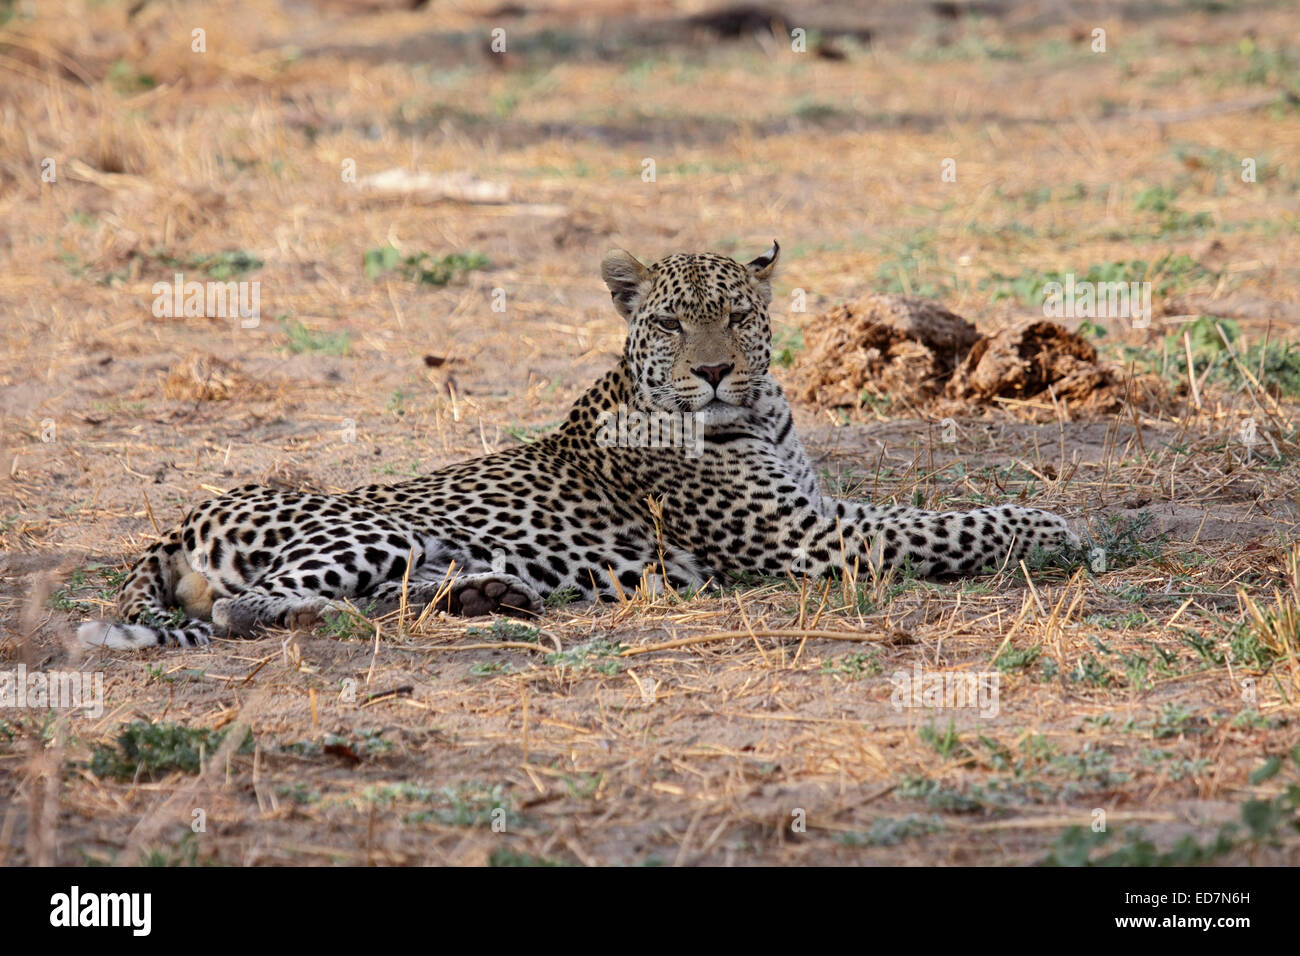 African leopard stretching out on the ground near Elephant droppings as it hunts in the bush in Botswana Stock Photo